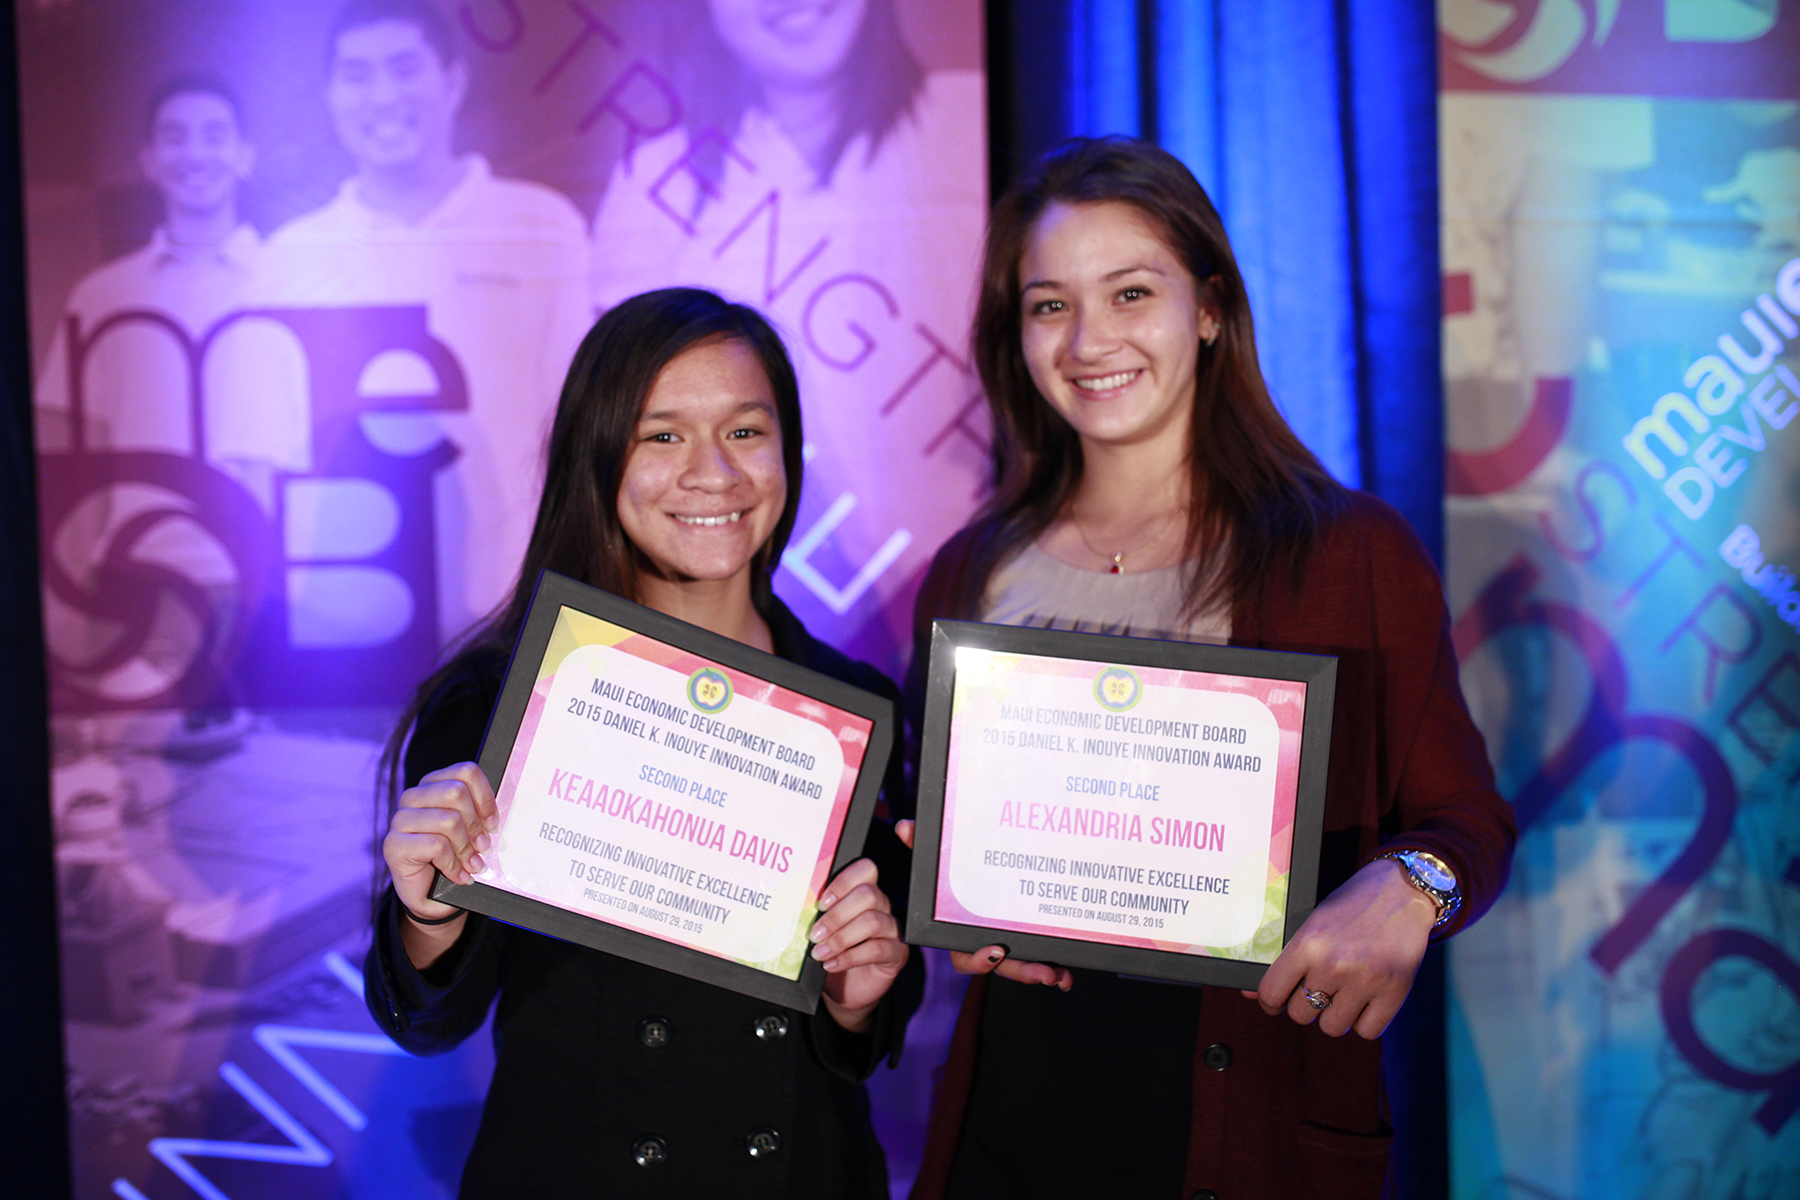 Second place honors went to the student team of Amber “Momi” Afelin (right), Ke‘aokahonua Davis, and Alexandria Simon from Moloka‘i High School for their project, “Investigating Agar Extraction from Gracilaria salicornia.” MEDB photo.